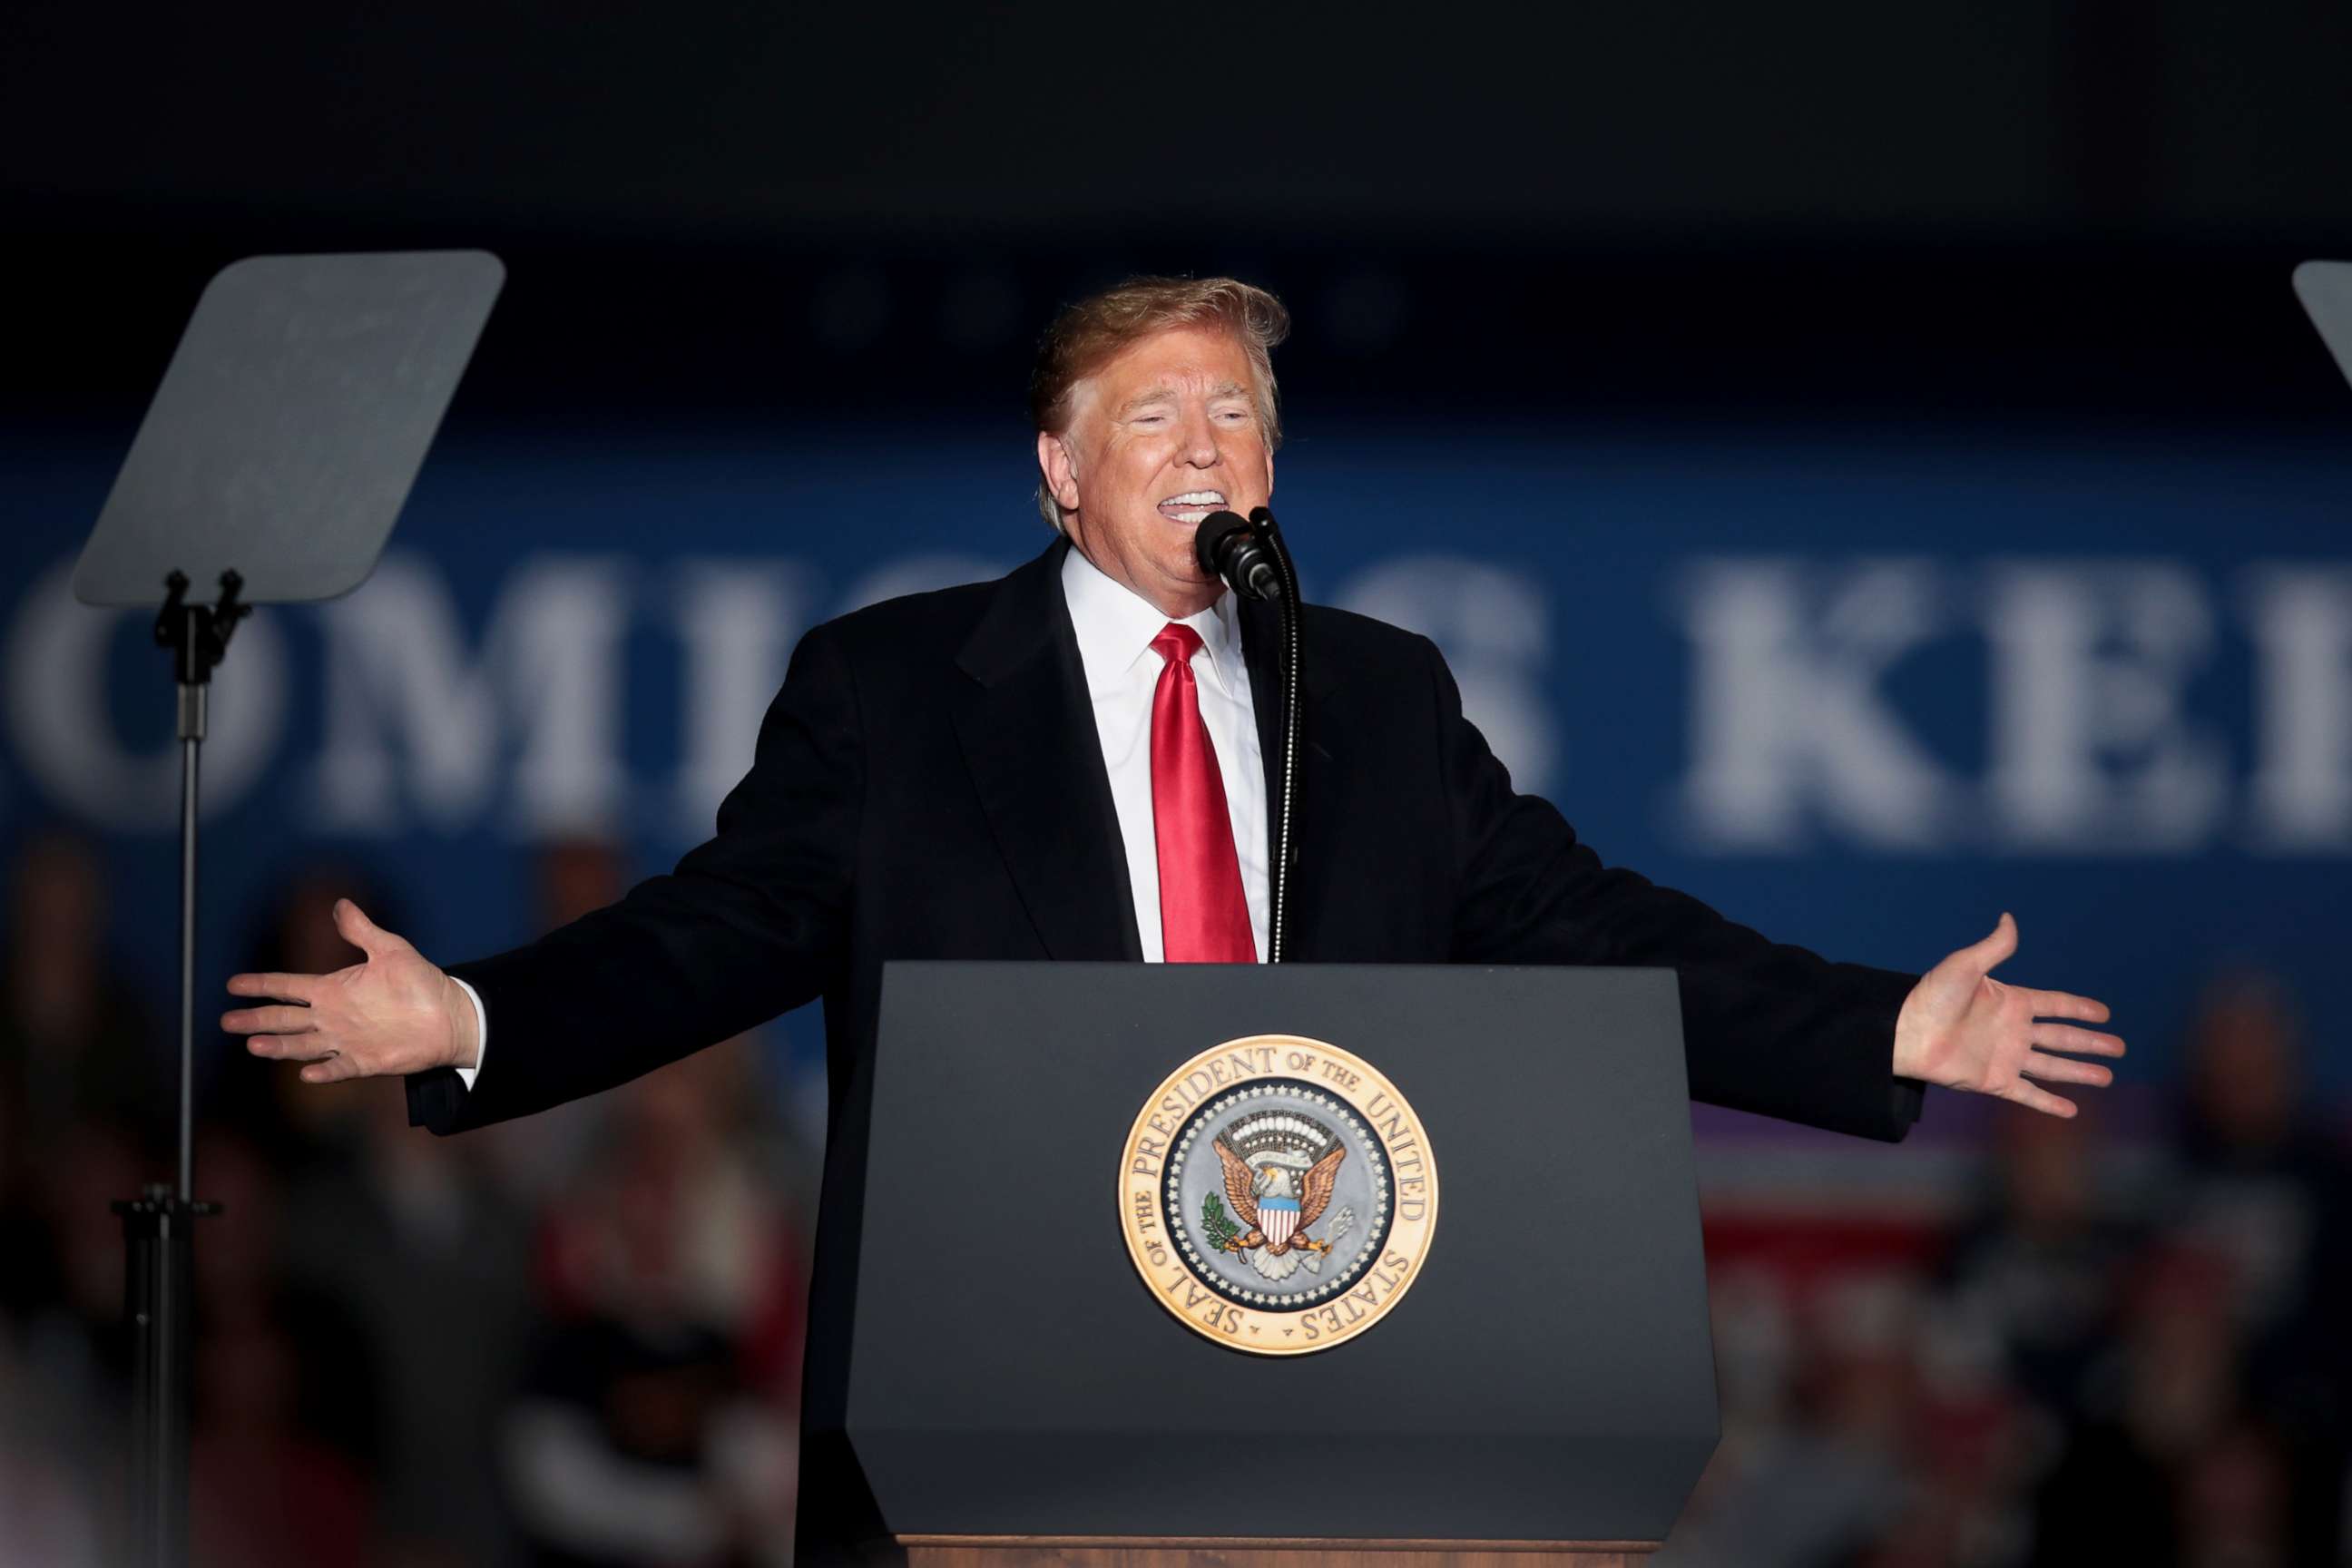 PHOTO: President Donald Trump speaks to supporters during a rally at the Southern Illinois Airport, Oct. 27, 2018, in Murphysboro, Ill.